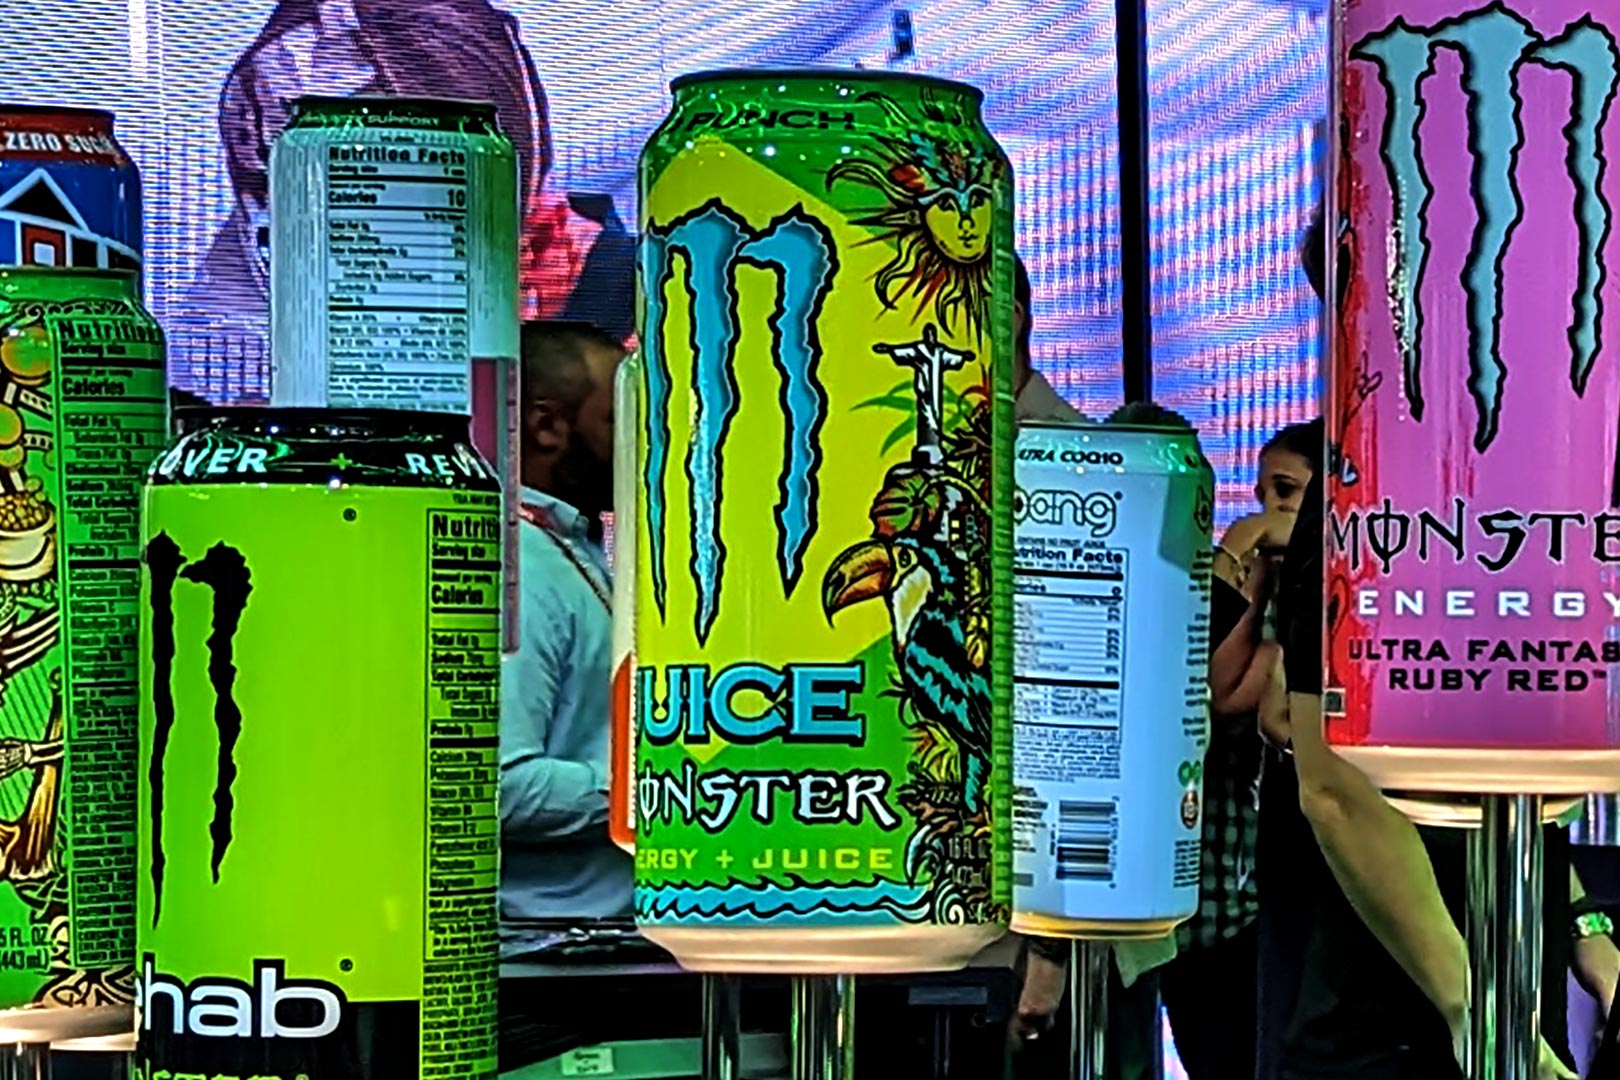 Rio Punch Monster Juice energy drink coming to market shortly